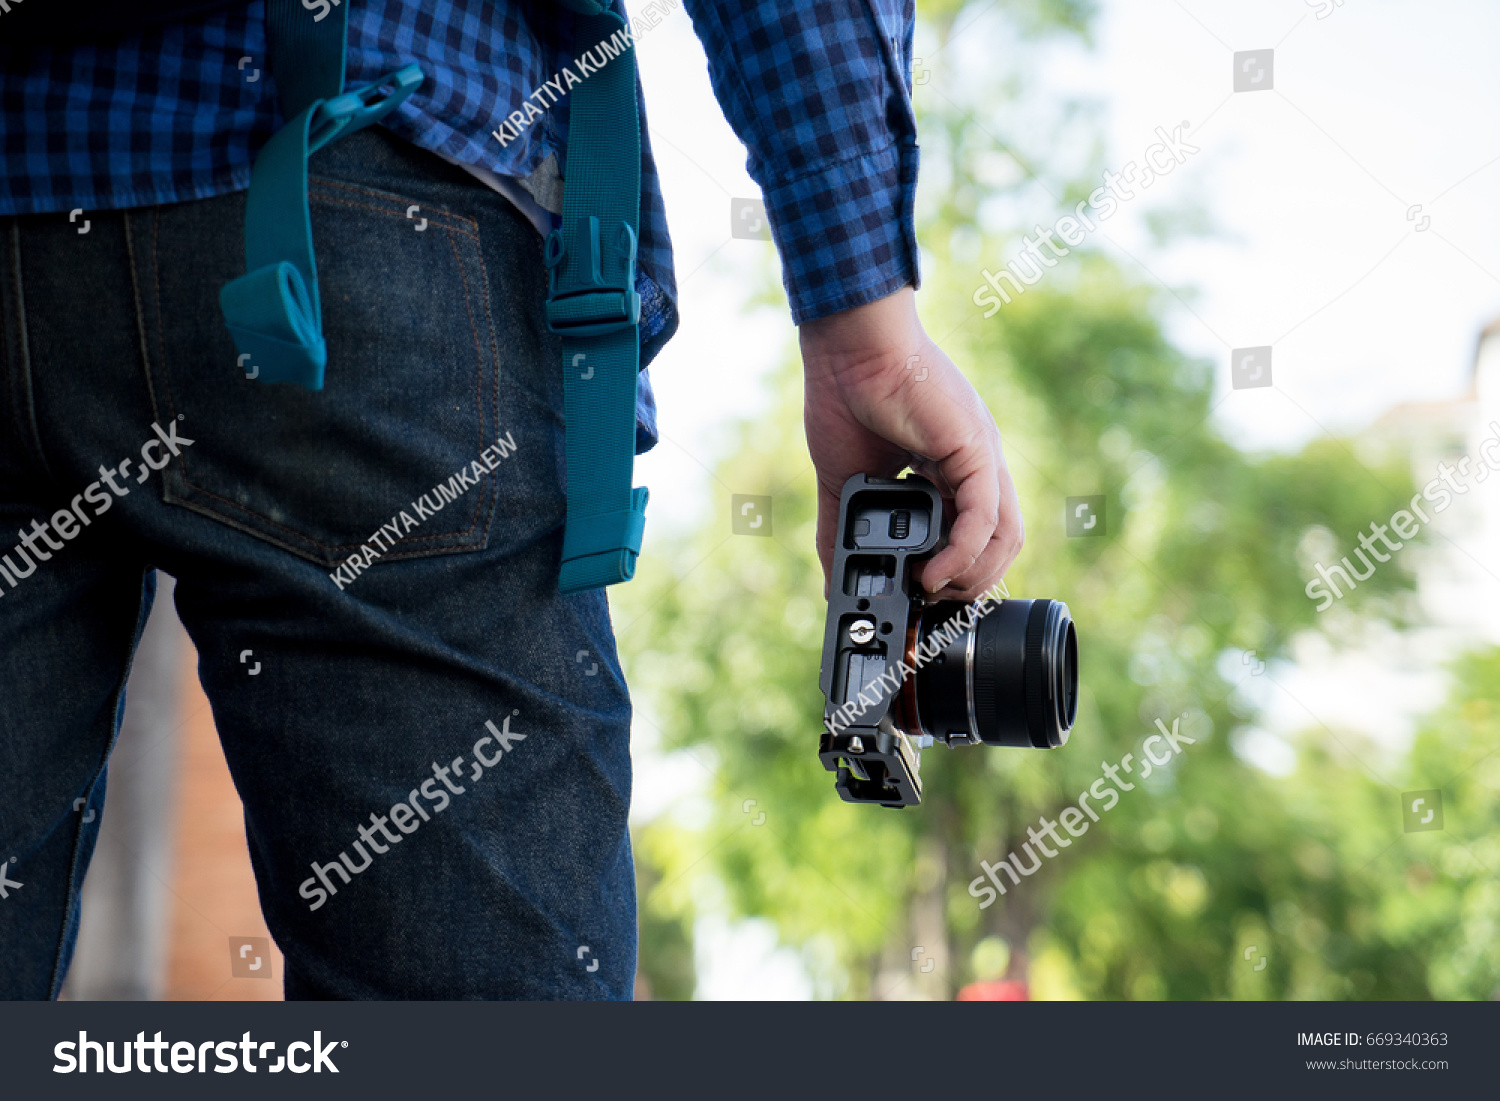 Photographer standing and holding camera  #669340363